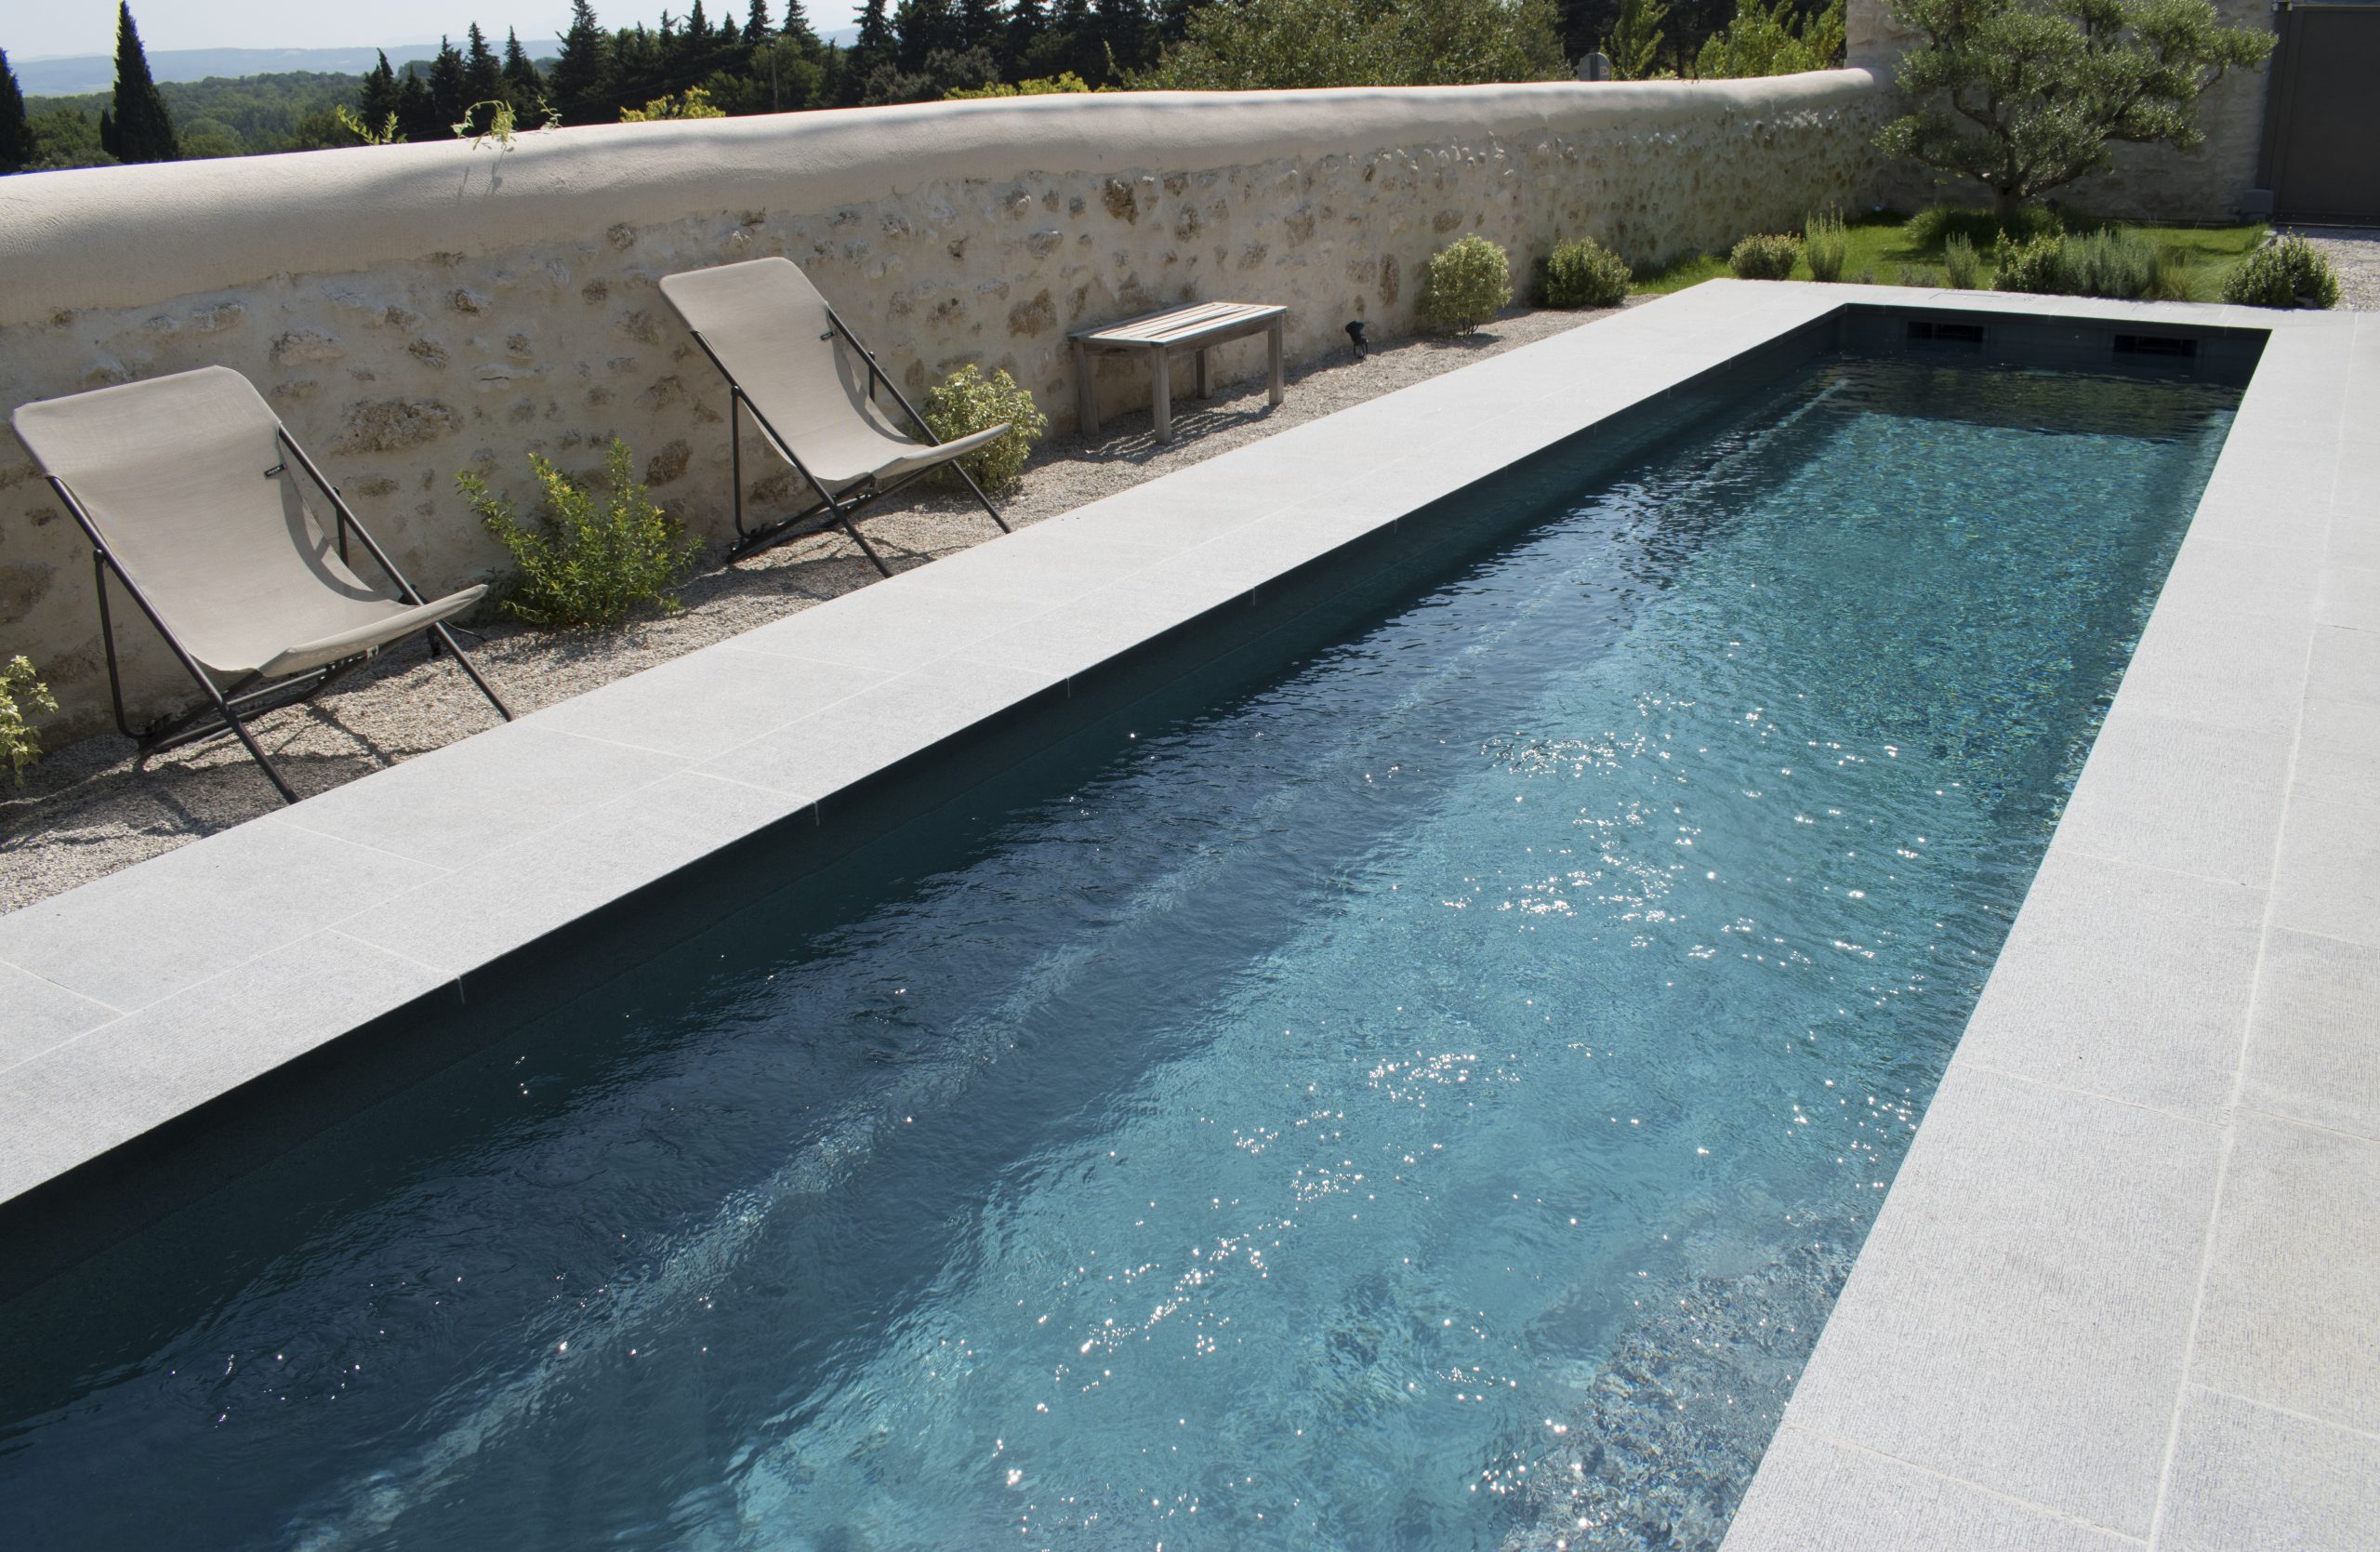 Altair 5 Flat Bottomed Ceramic de Luxe Swimming Pool | Bakewell Pools